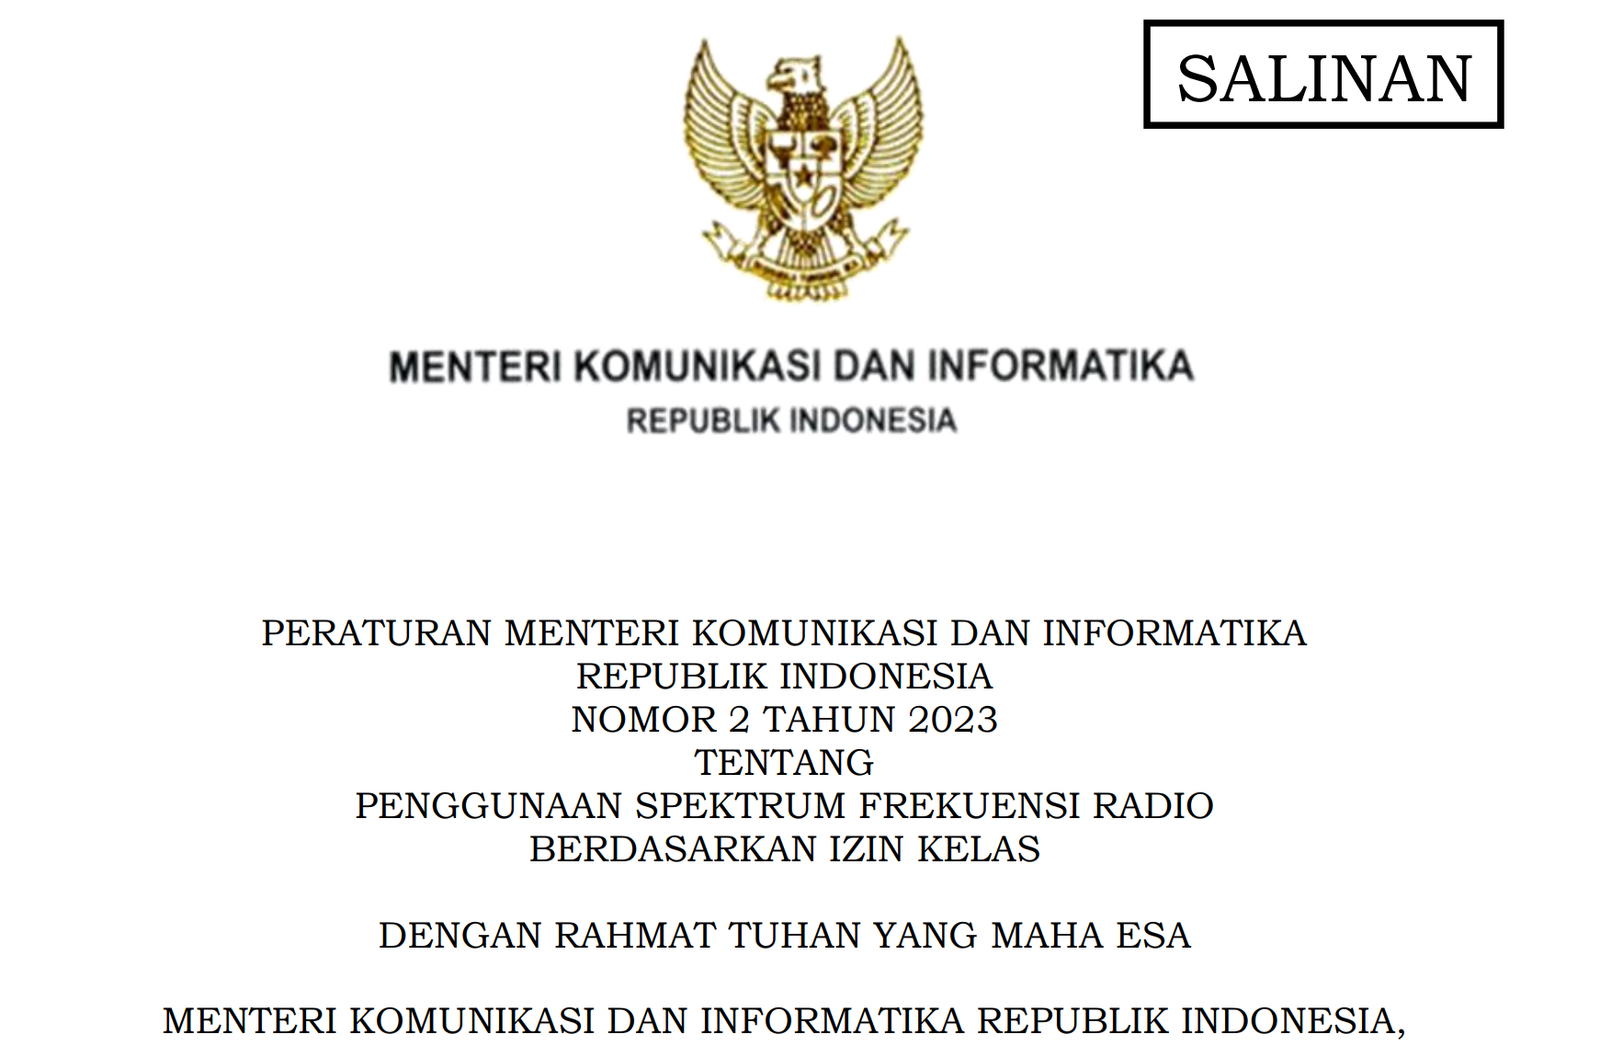 Kominfo’s Latest Regulation on the Use of Radio Frequency Spectrum Based on Class License